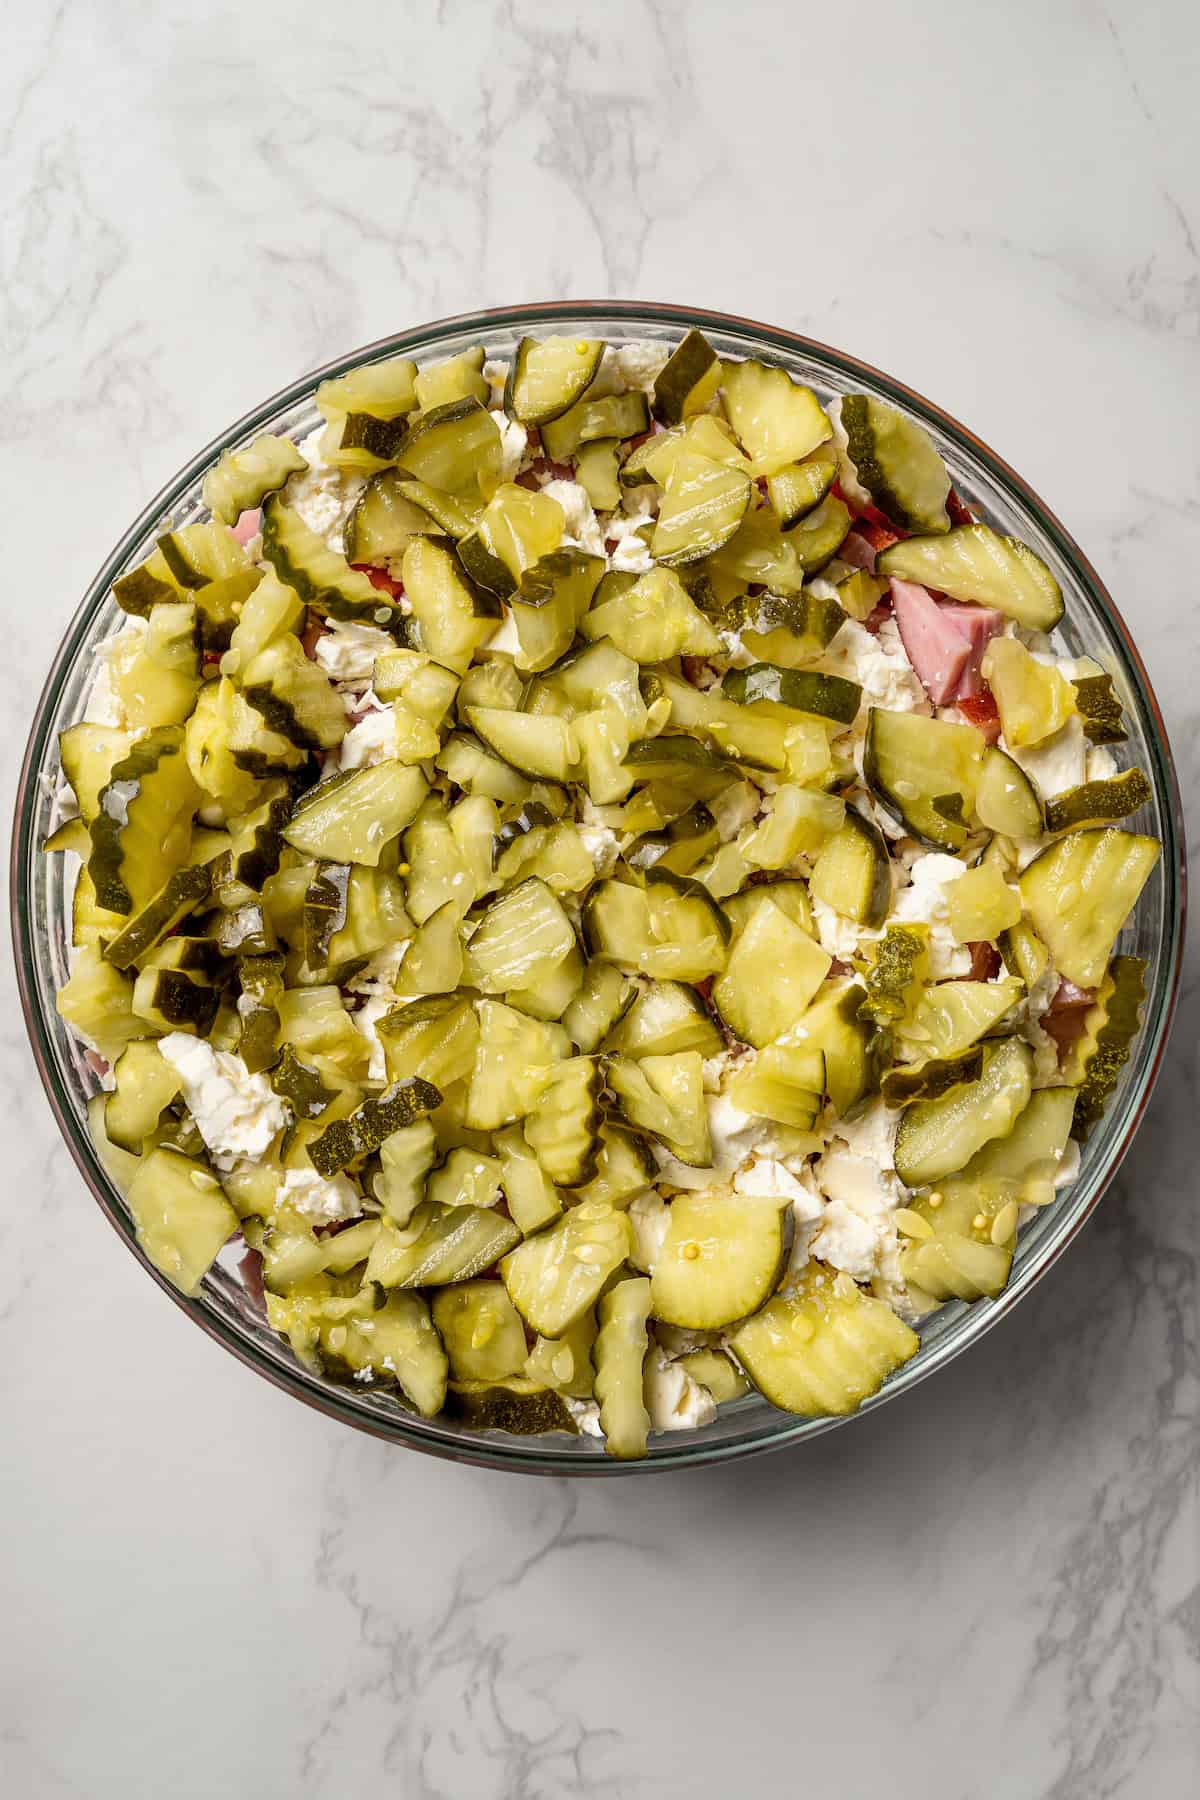 Chopped pickles layered over the other Russian salad ingredients in a glass bowl.